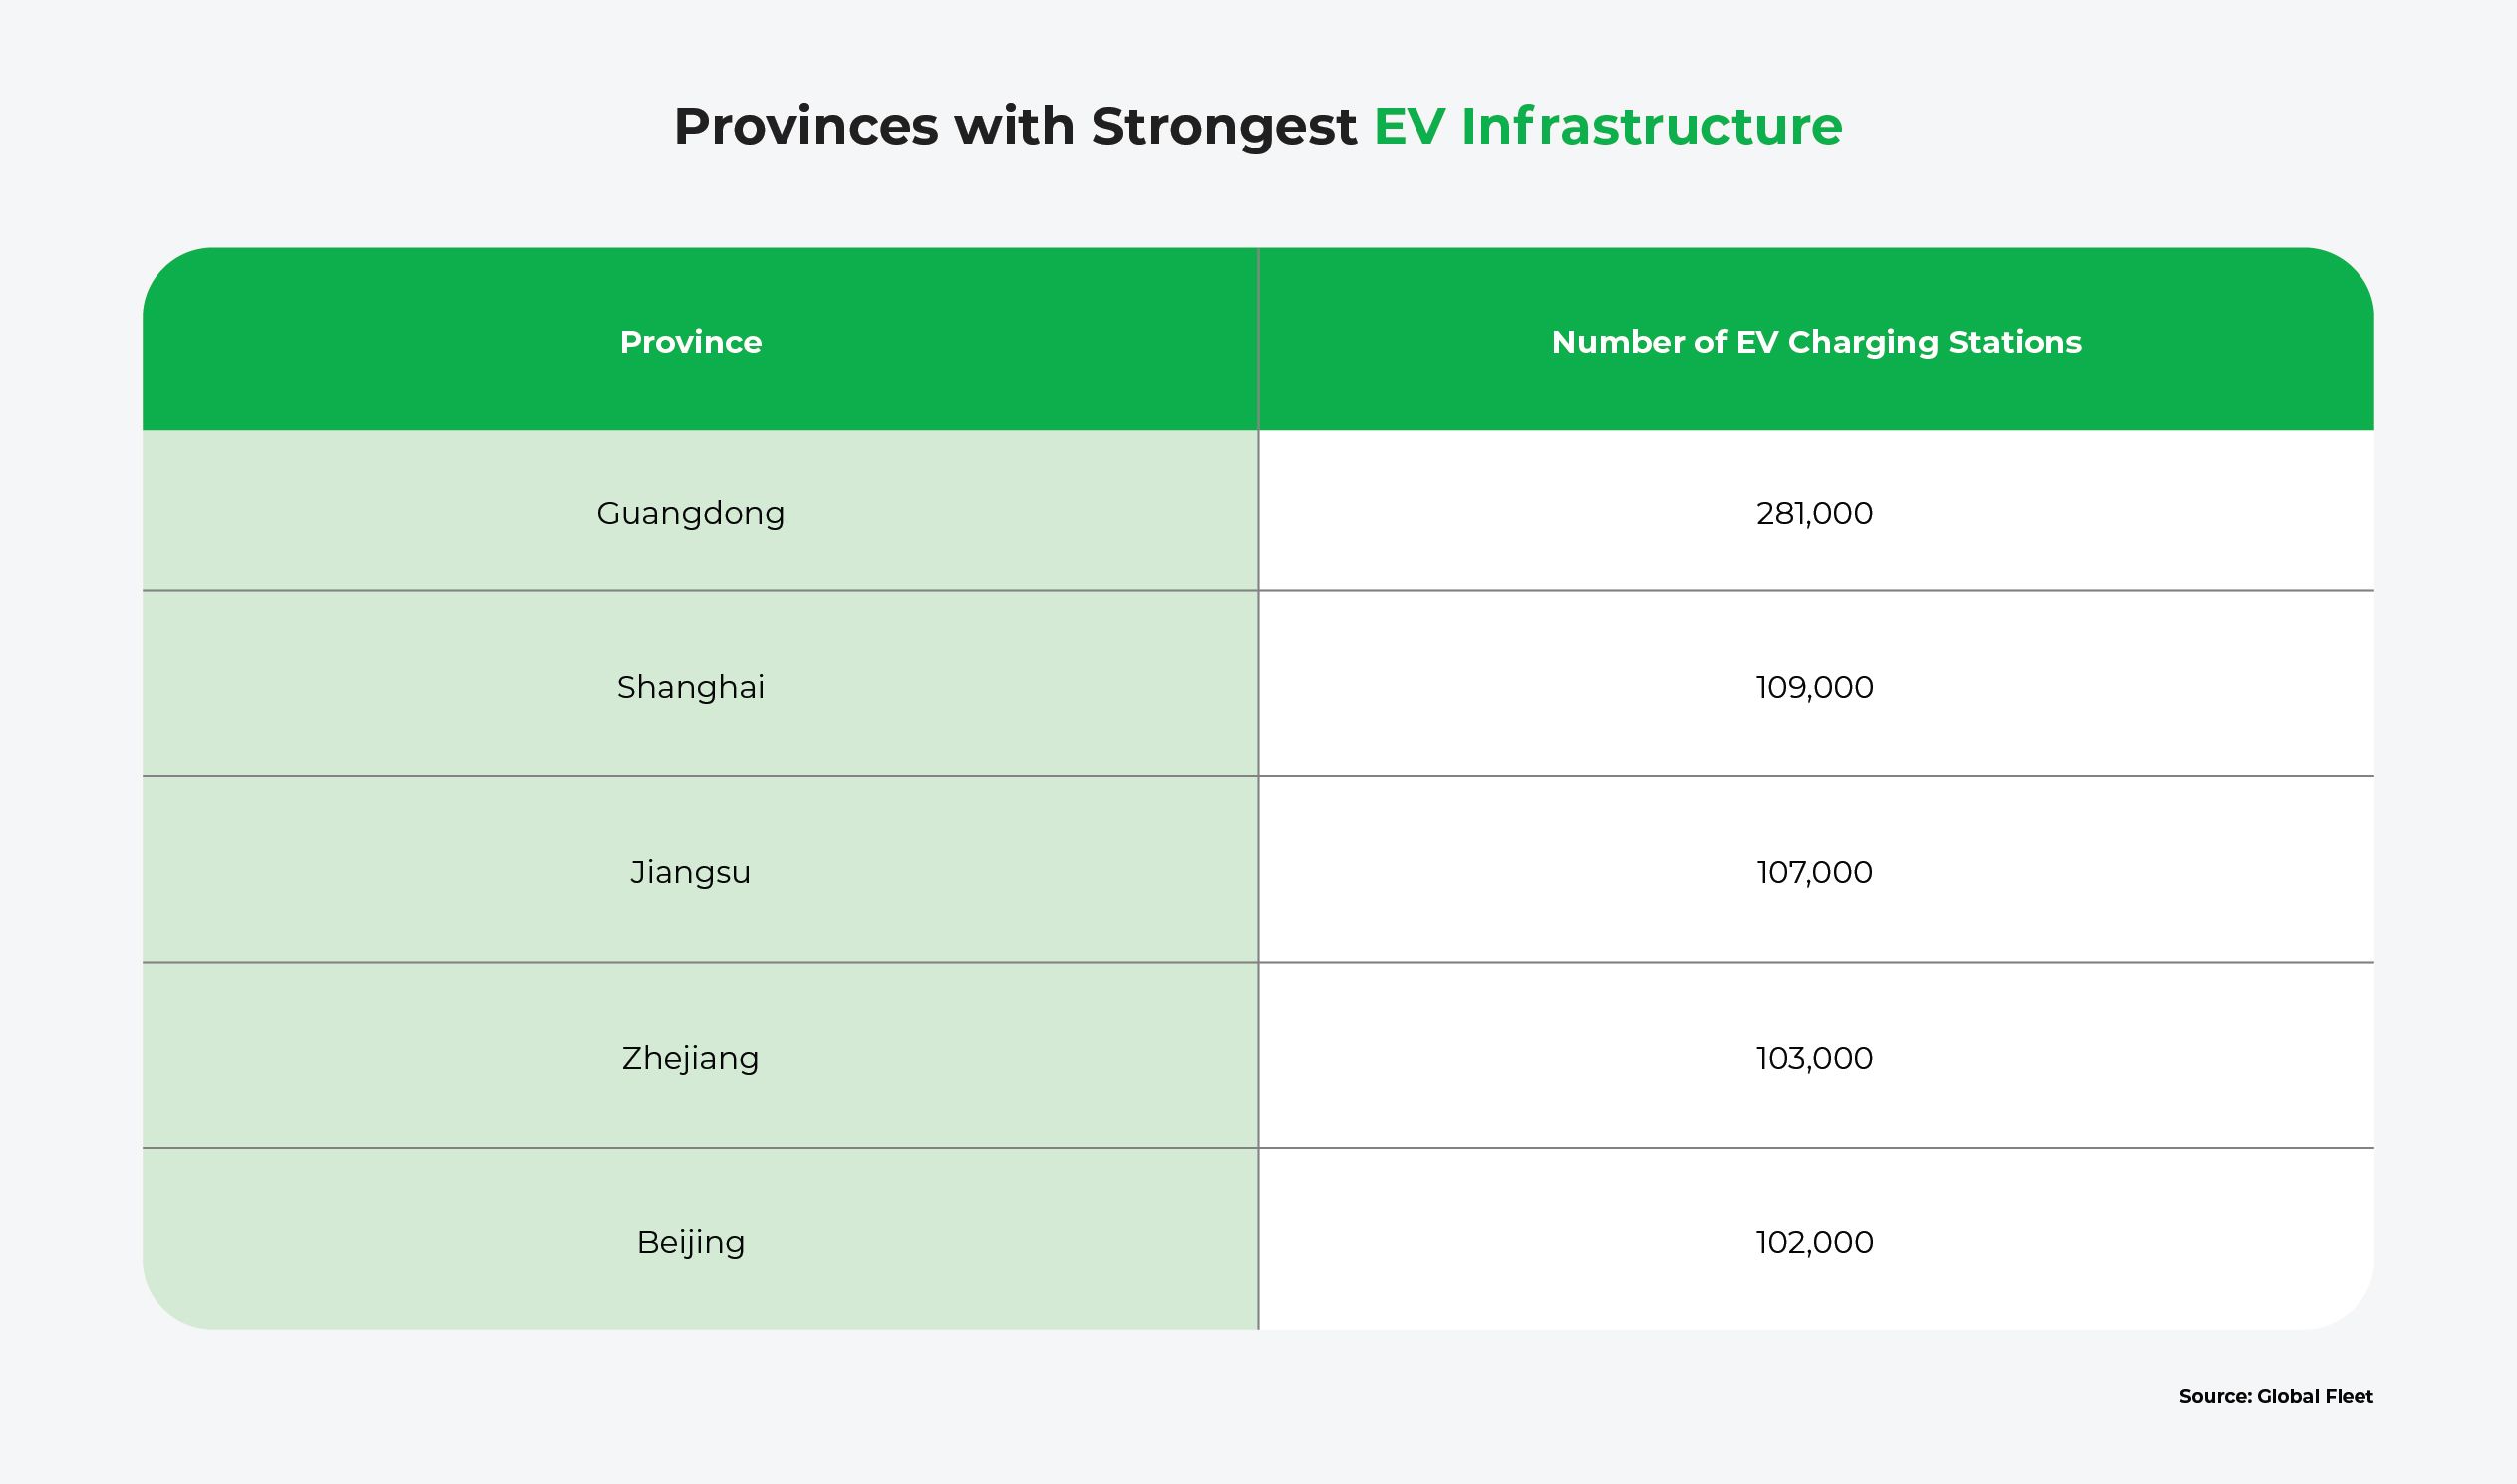 A table showing the number of charging stations in each of 5 provinces in China